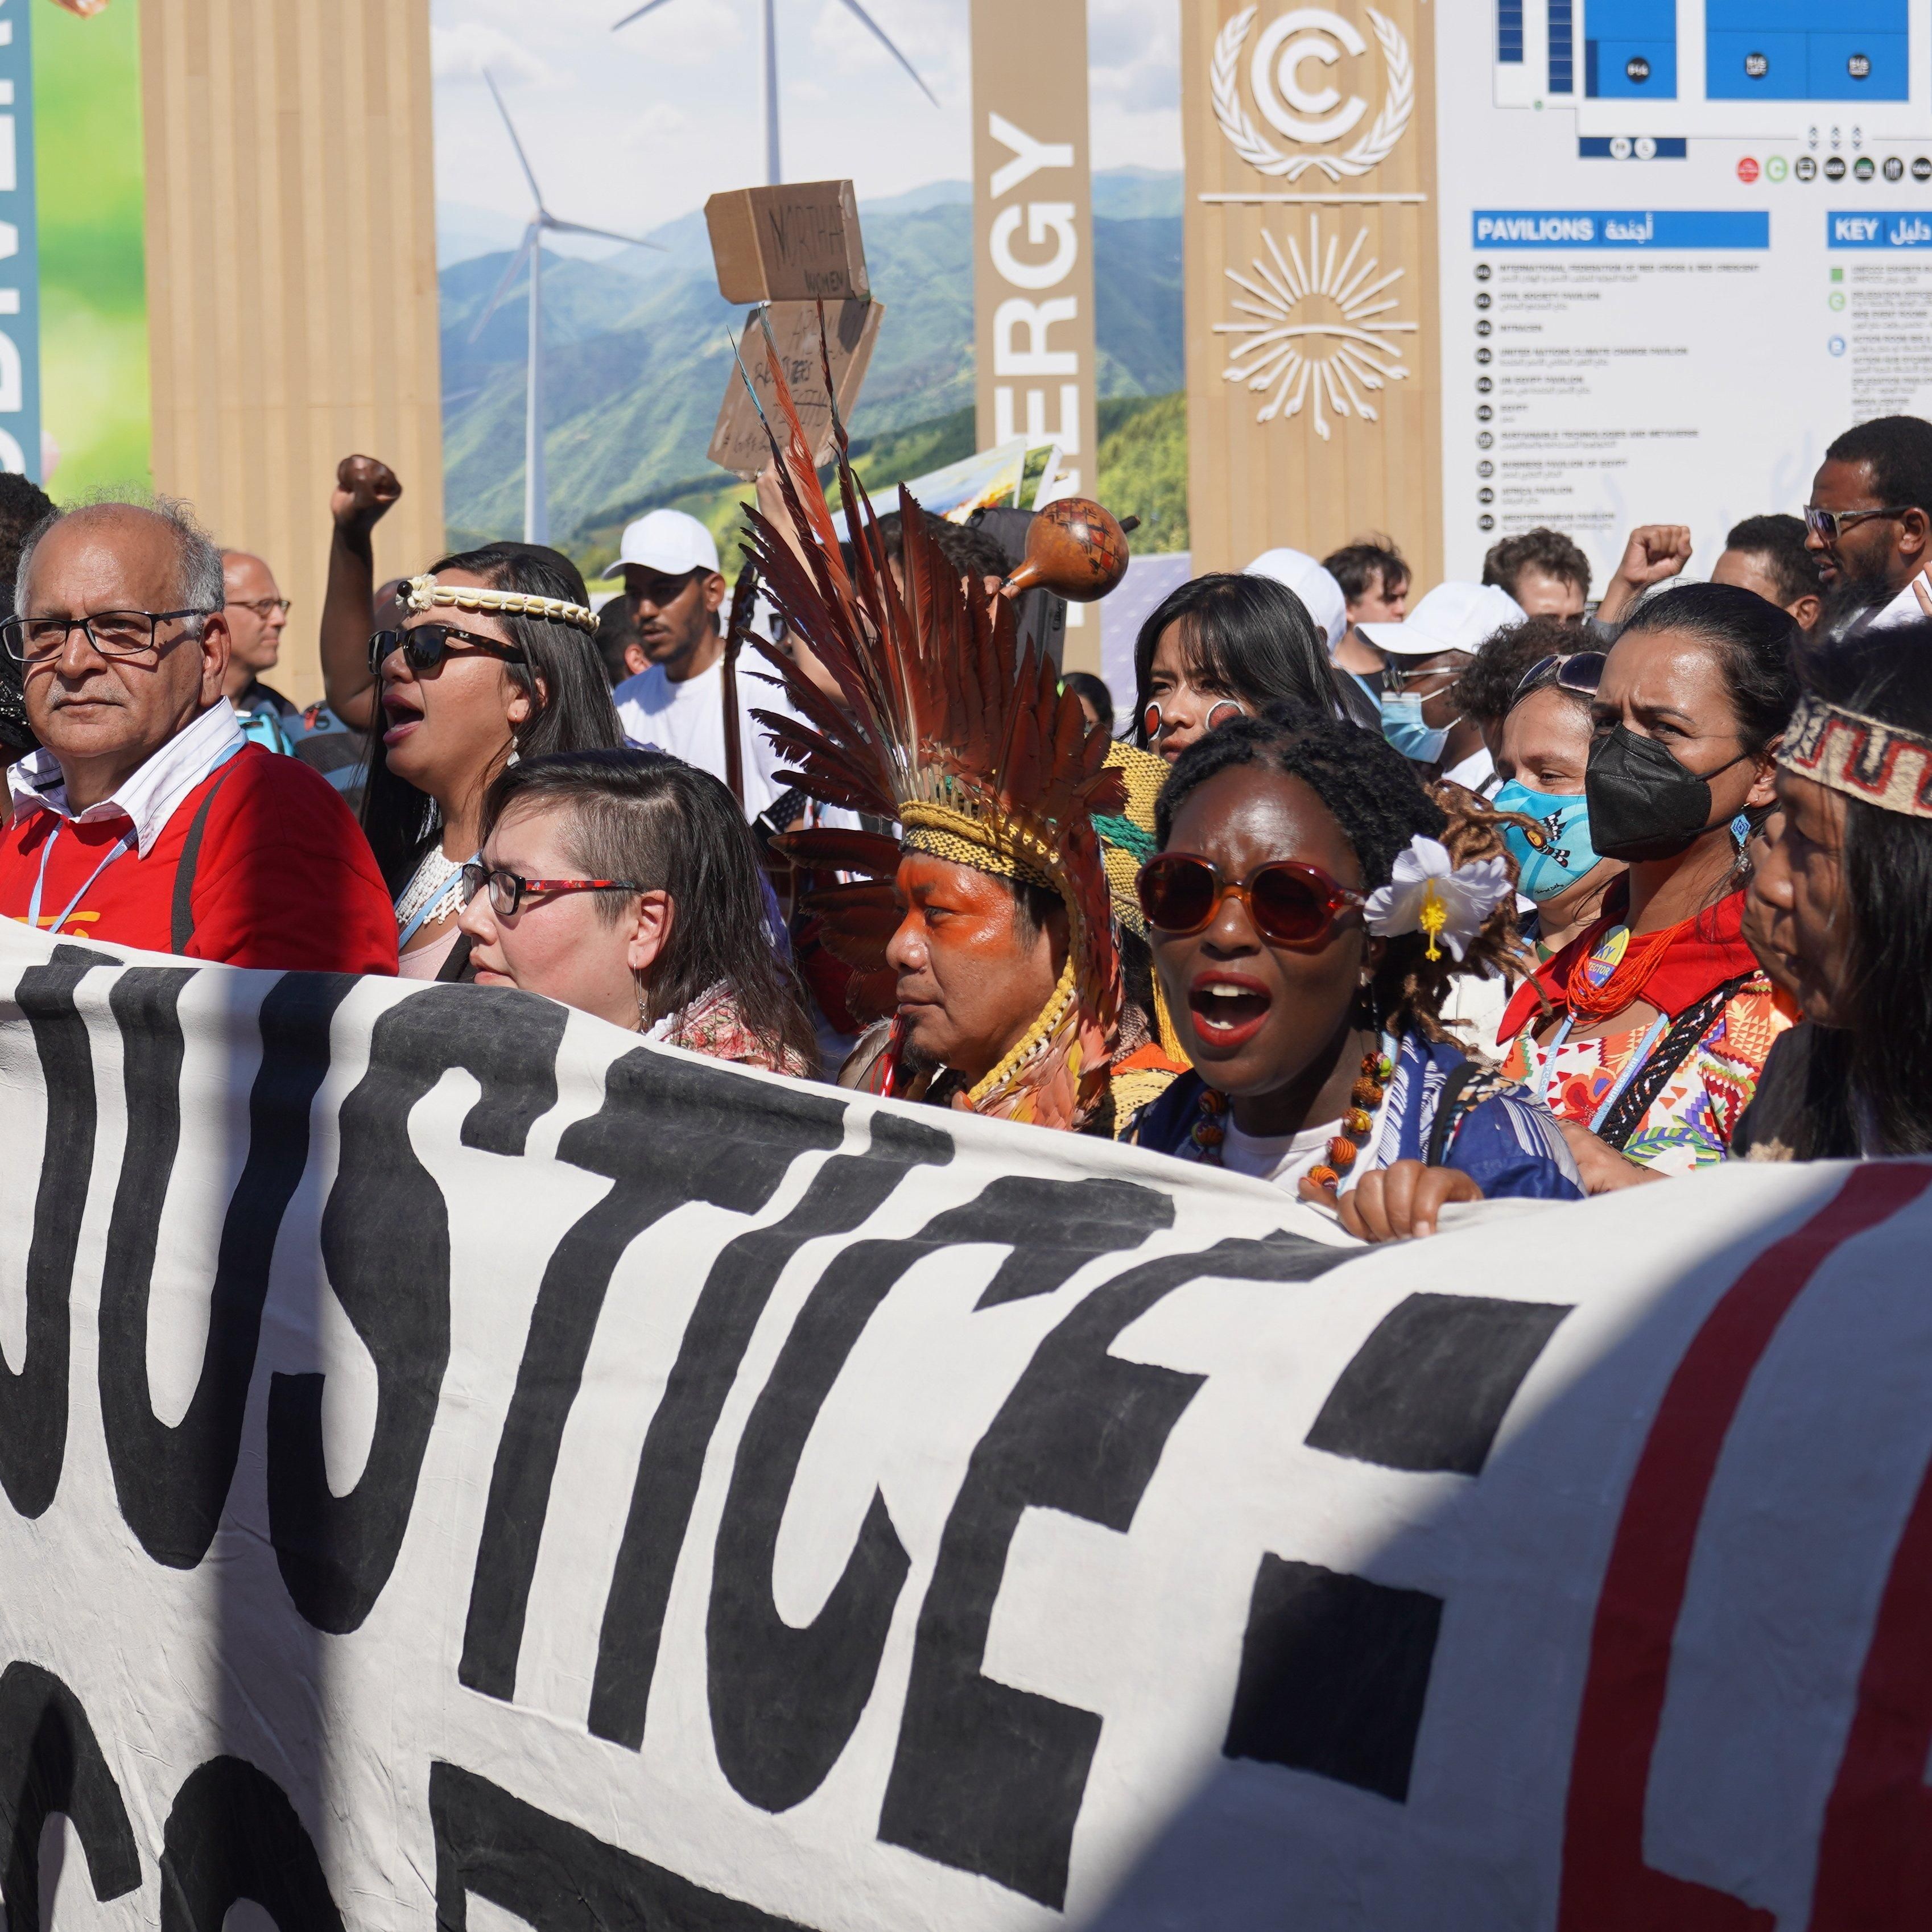 People participate in the Global Day of Action Climate Justice March at COP27 on November 12, 2022 in Sharm El-Sheikh, Egypt.